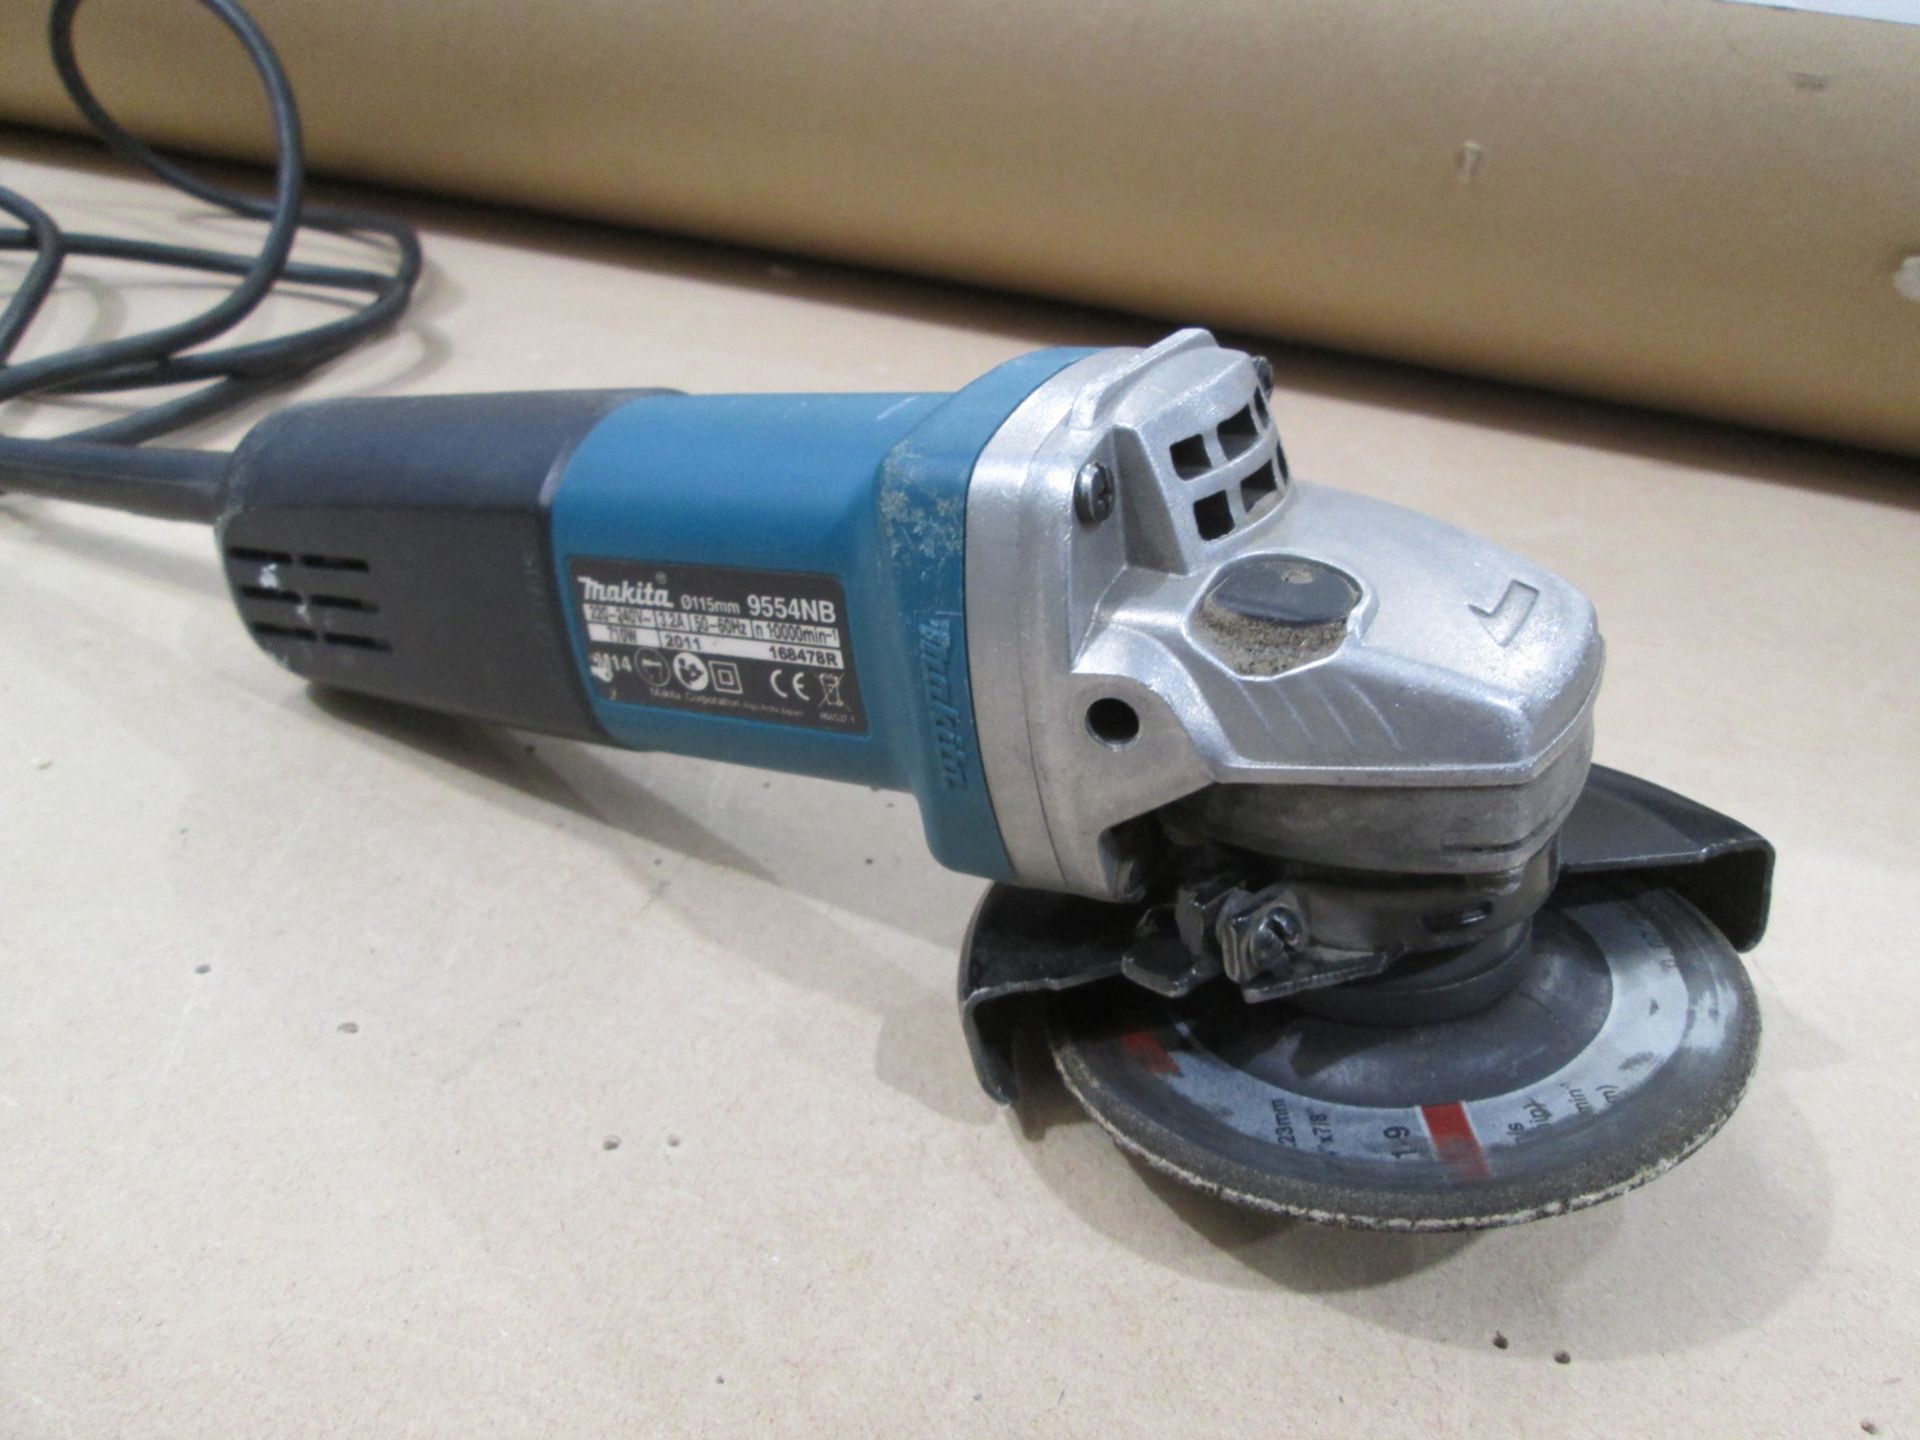 Makita 9554NB 115mm Angle Grinder, 240V, In wooden box with various disc's - Image 2 of 5